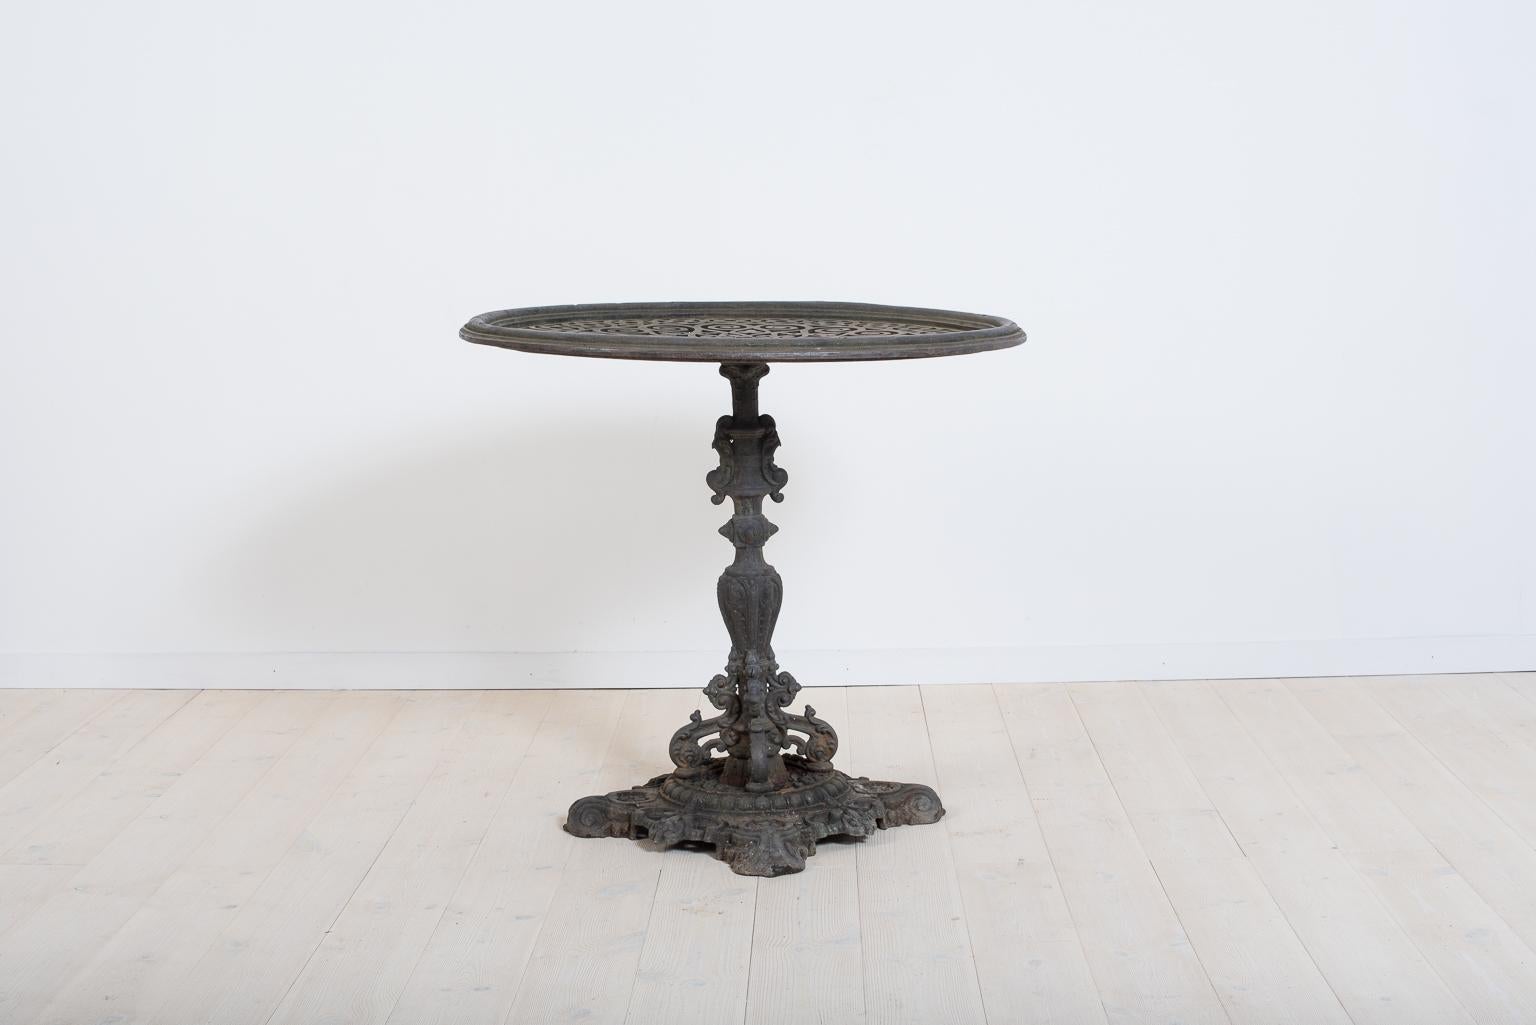 Large antique garden table from Sweden. The table is from the late 1800s and in the rococo revival style. Made in solid cast iron. The foot is stead and solid and intricately decorated. Attractive and authentic patina.
   